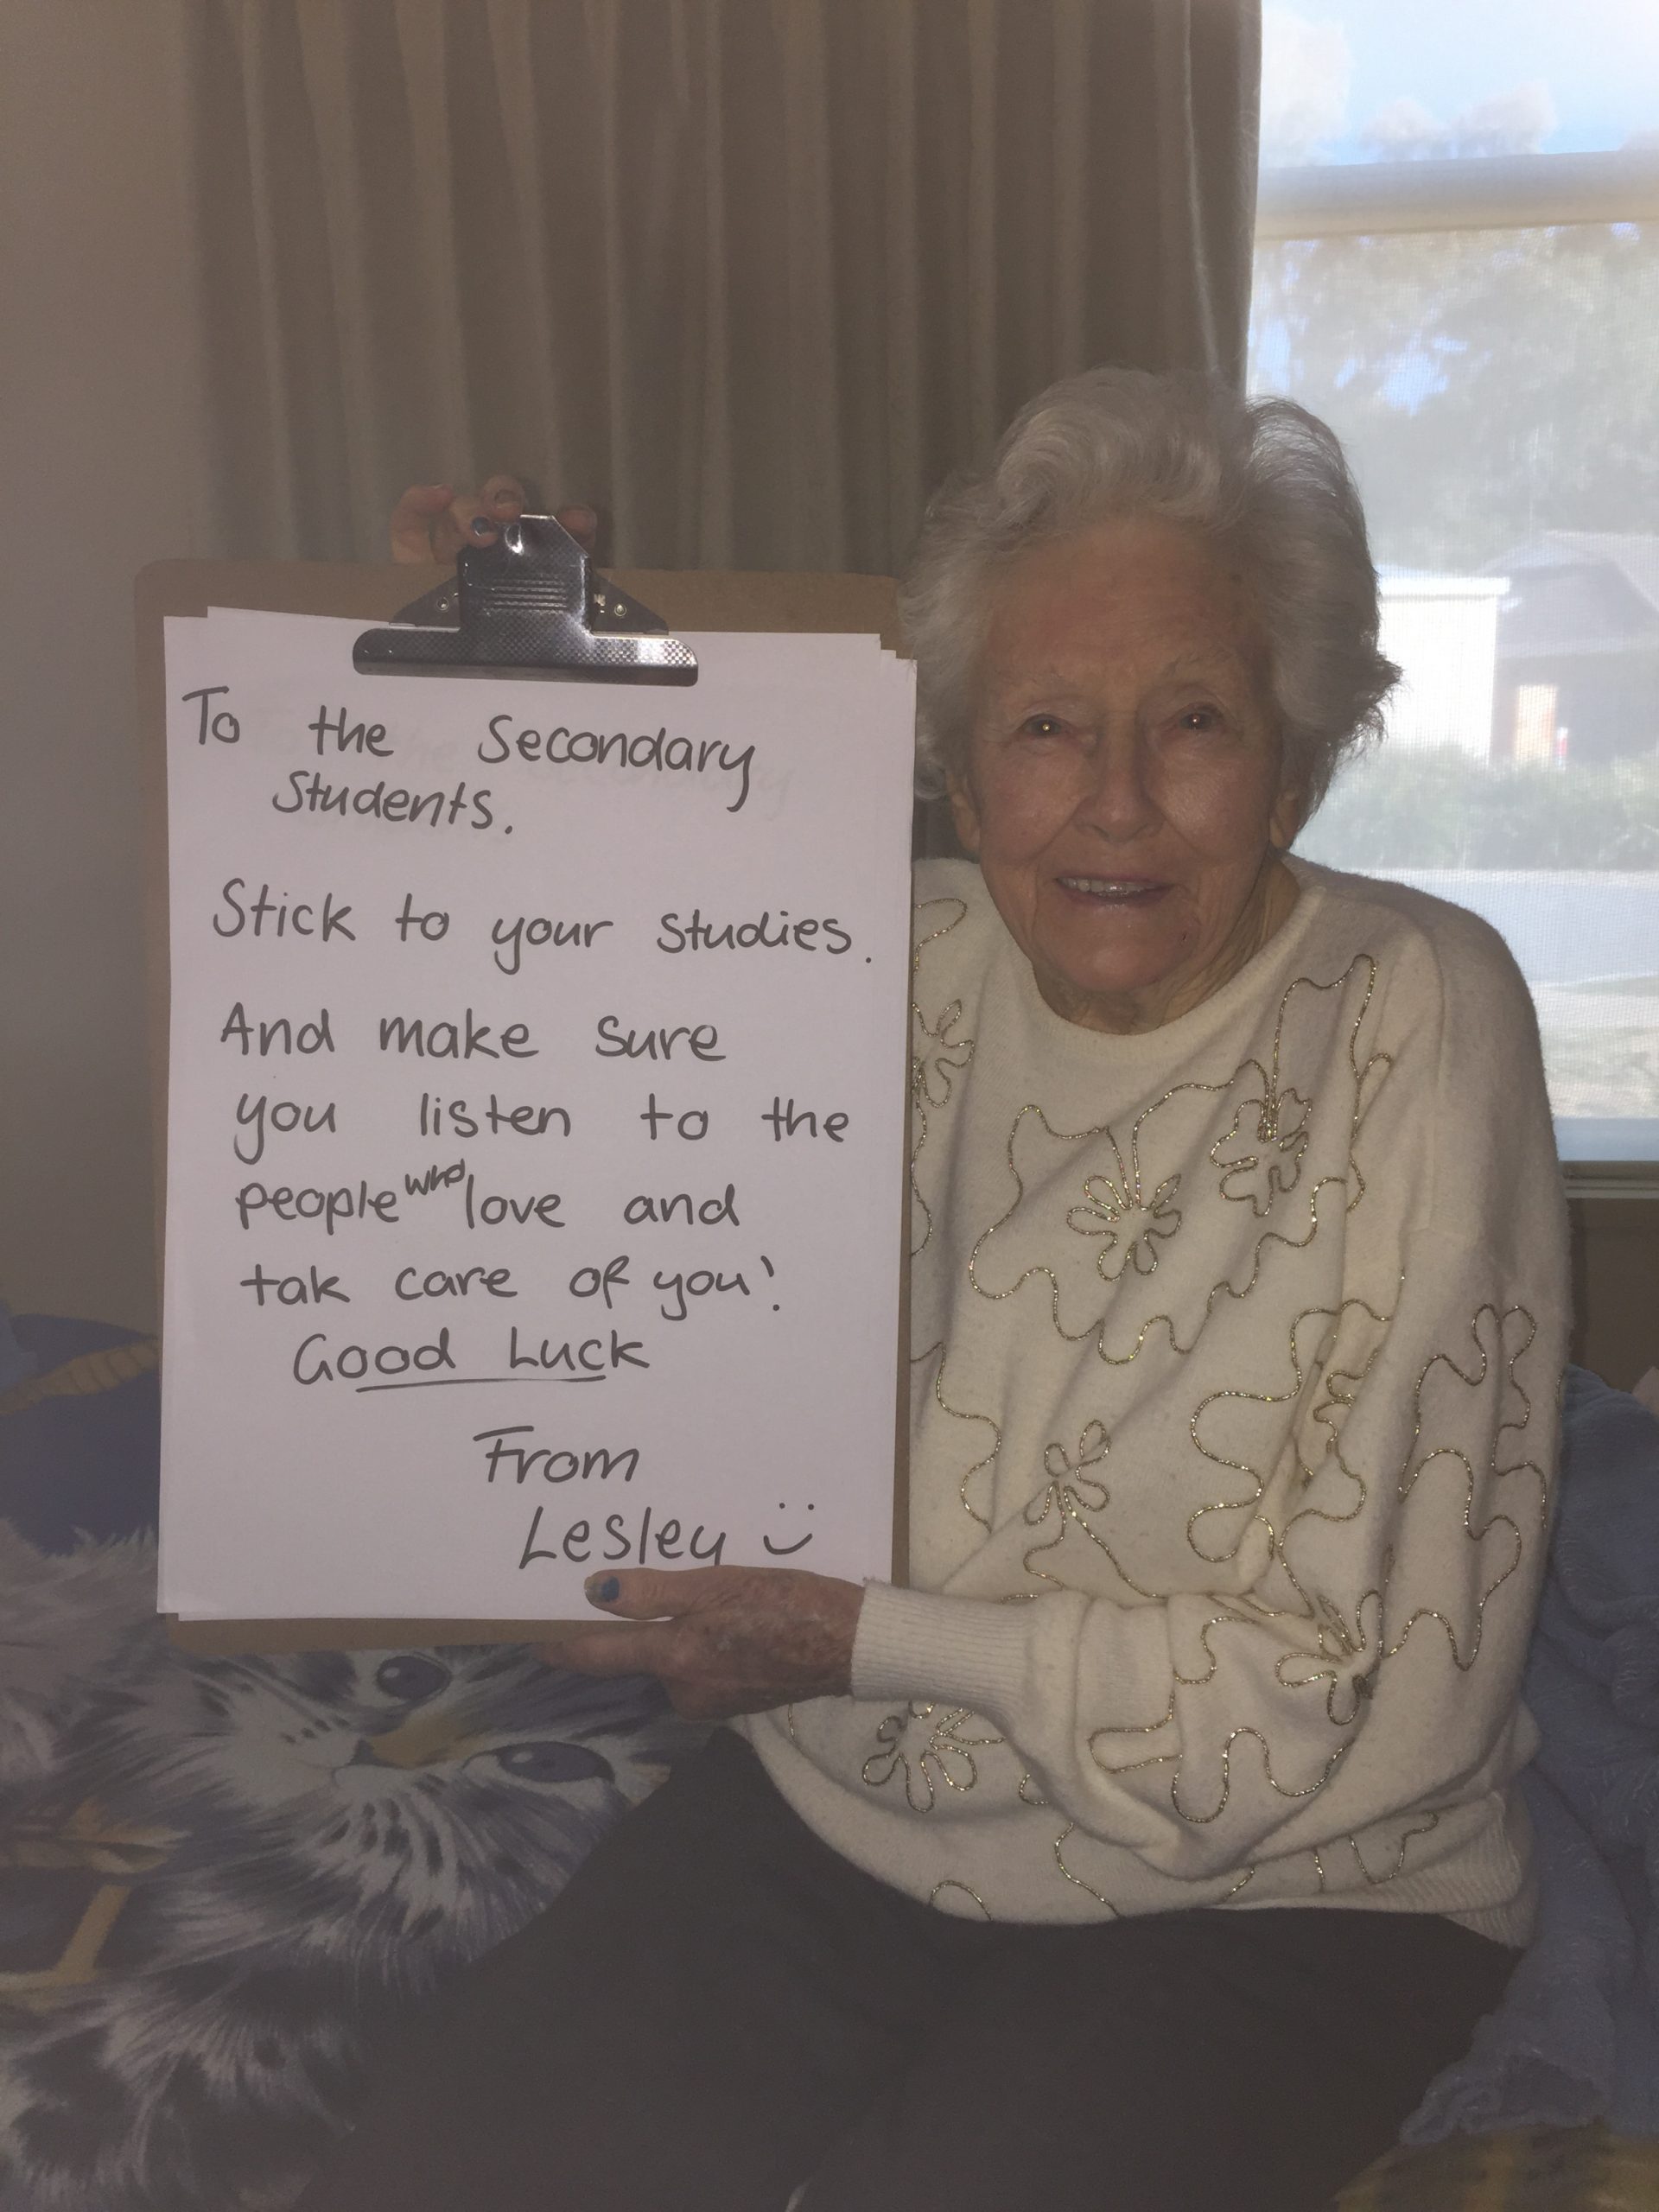 Lesley sits on the edge of a bed holding up a large clipboard which reads "To the Secondary Students, Stick to your studies. And make sure you listen to the people who love you and take care of you! Good lucky. From Lesley"